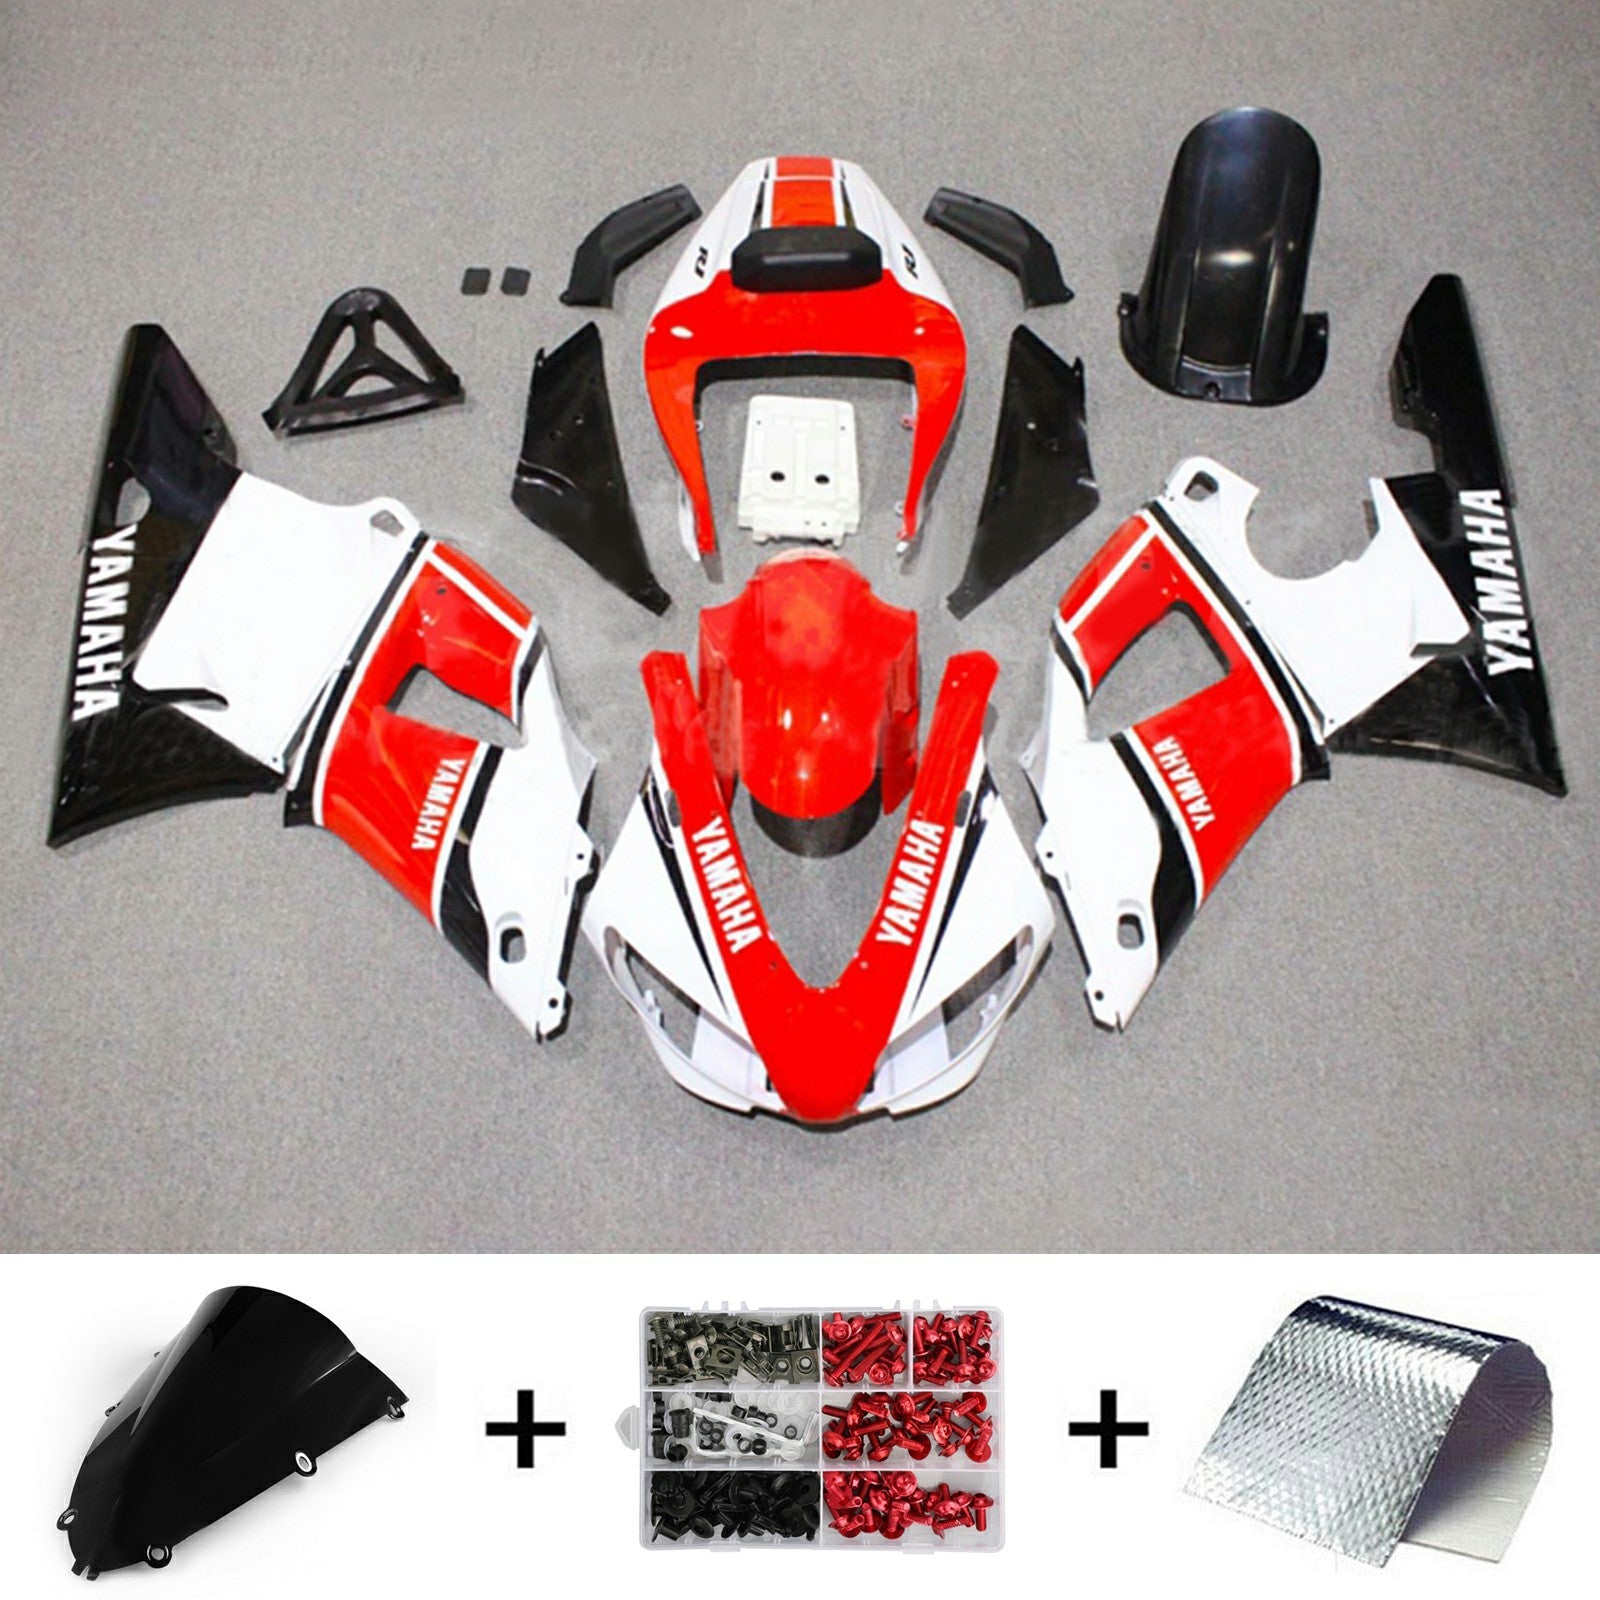 Amotopart Yamaha YZF 1000 R1 1998-1999 Kit carena carrozzeria in plastica ABS